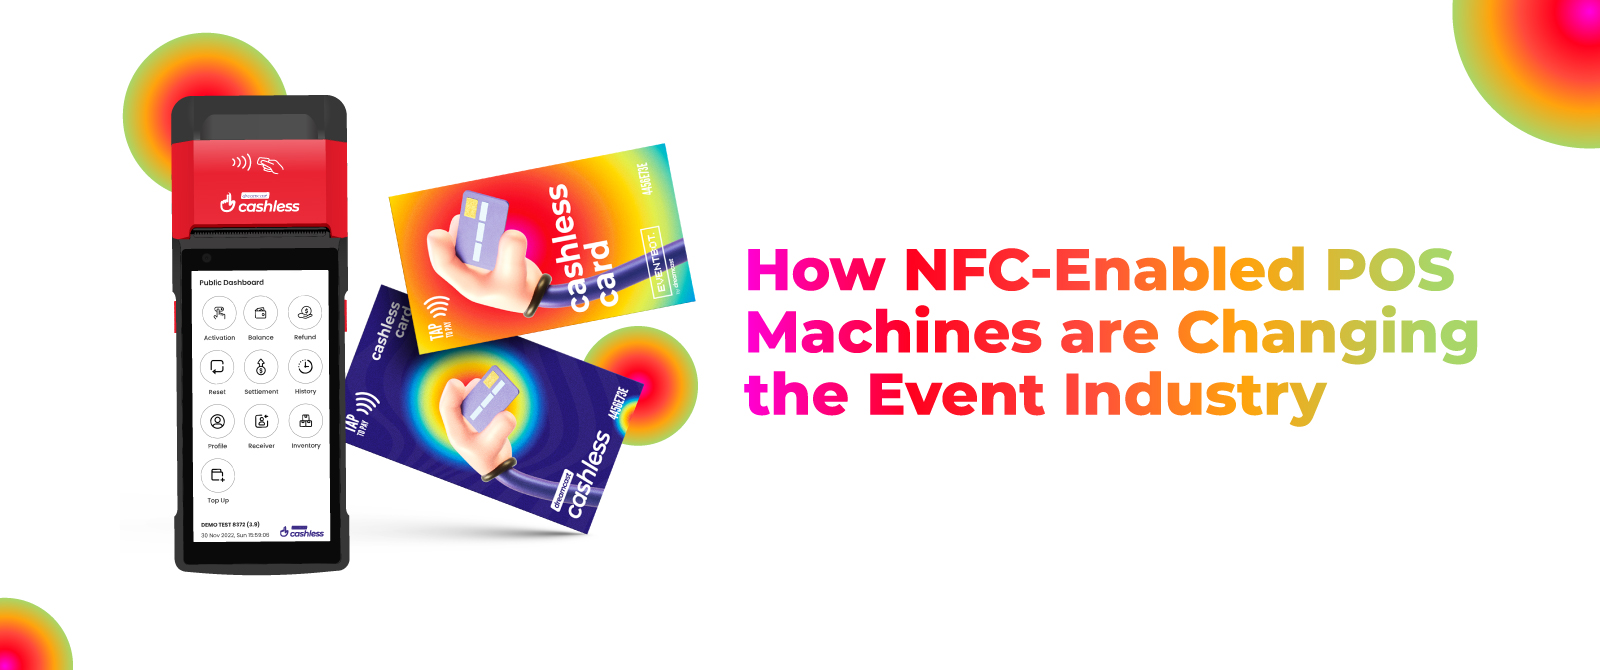 How NFC-Enabled POS Machines are Changing the Event Industry